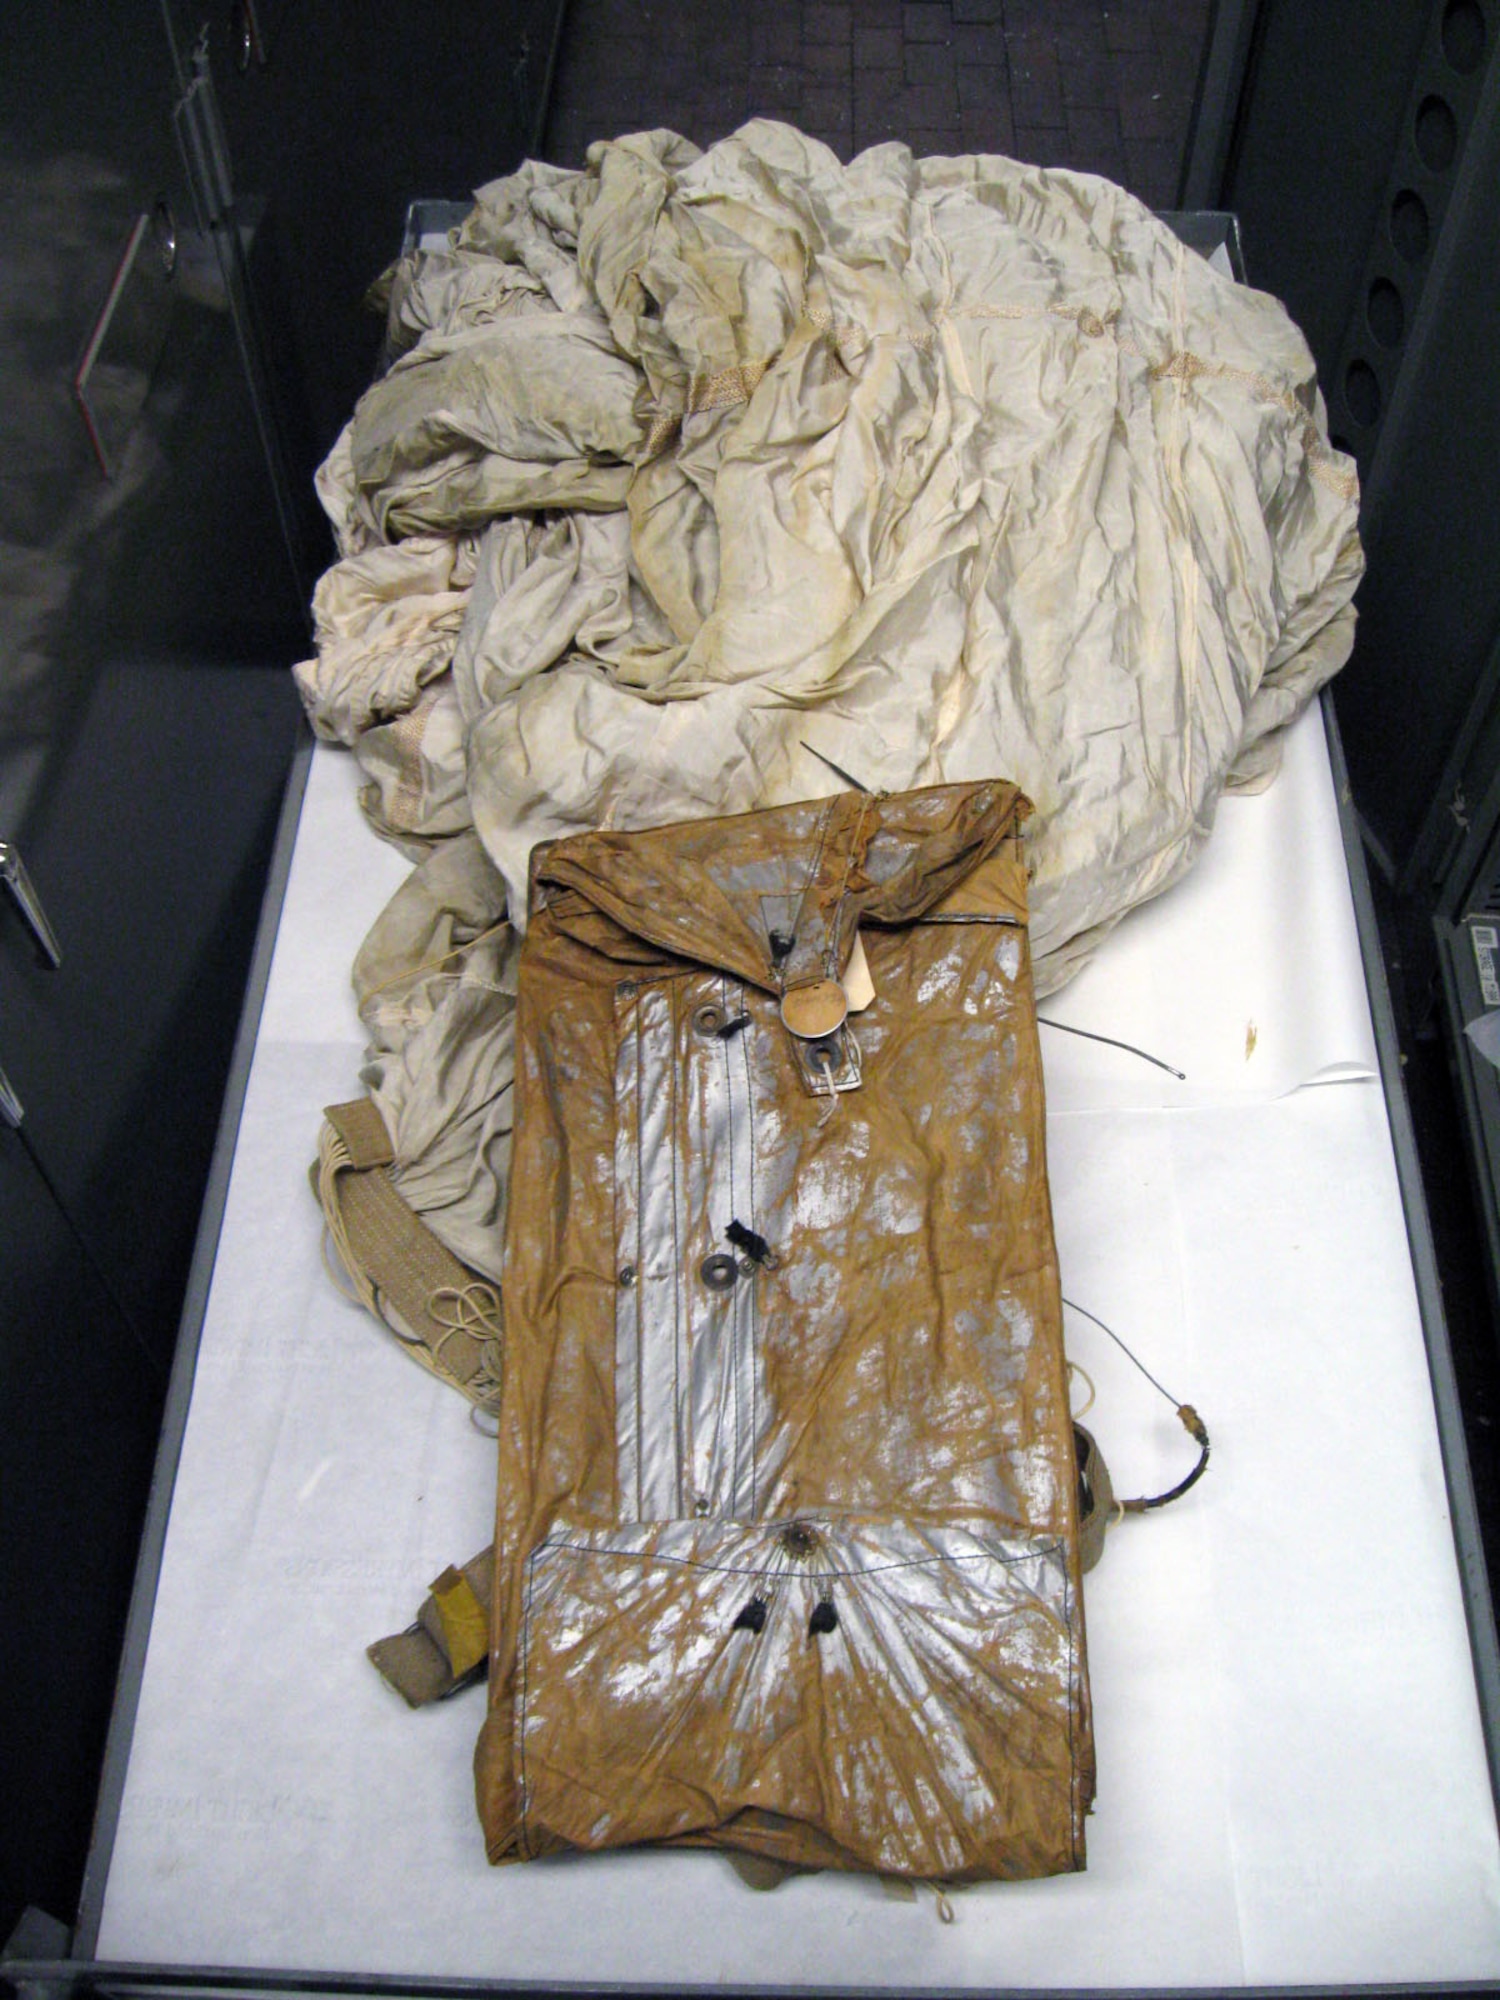 This item was used on March 28, 1919, for the first jump from an airplane with a free back pack parachute, at McCook Field in Dayton, Ohio. Civilian Leslie Irving jumped from a DH-9 flown by Floyd Smith, the designer of the parachute. (U.S. Air Force photo)